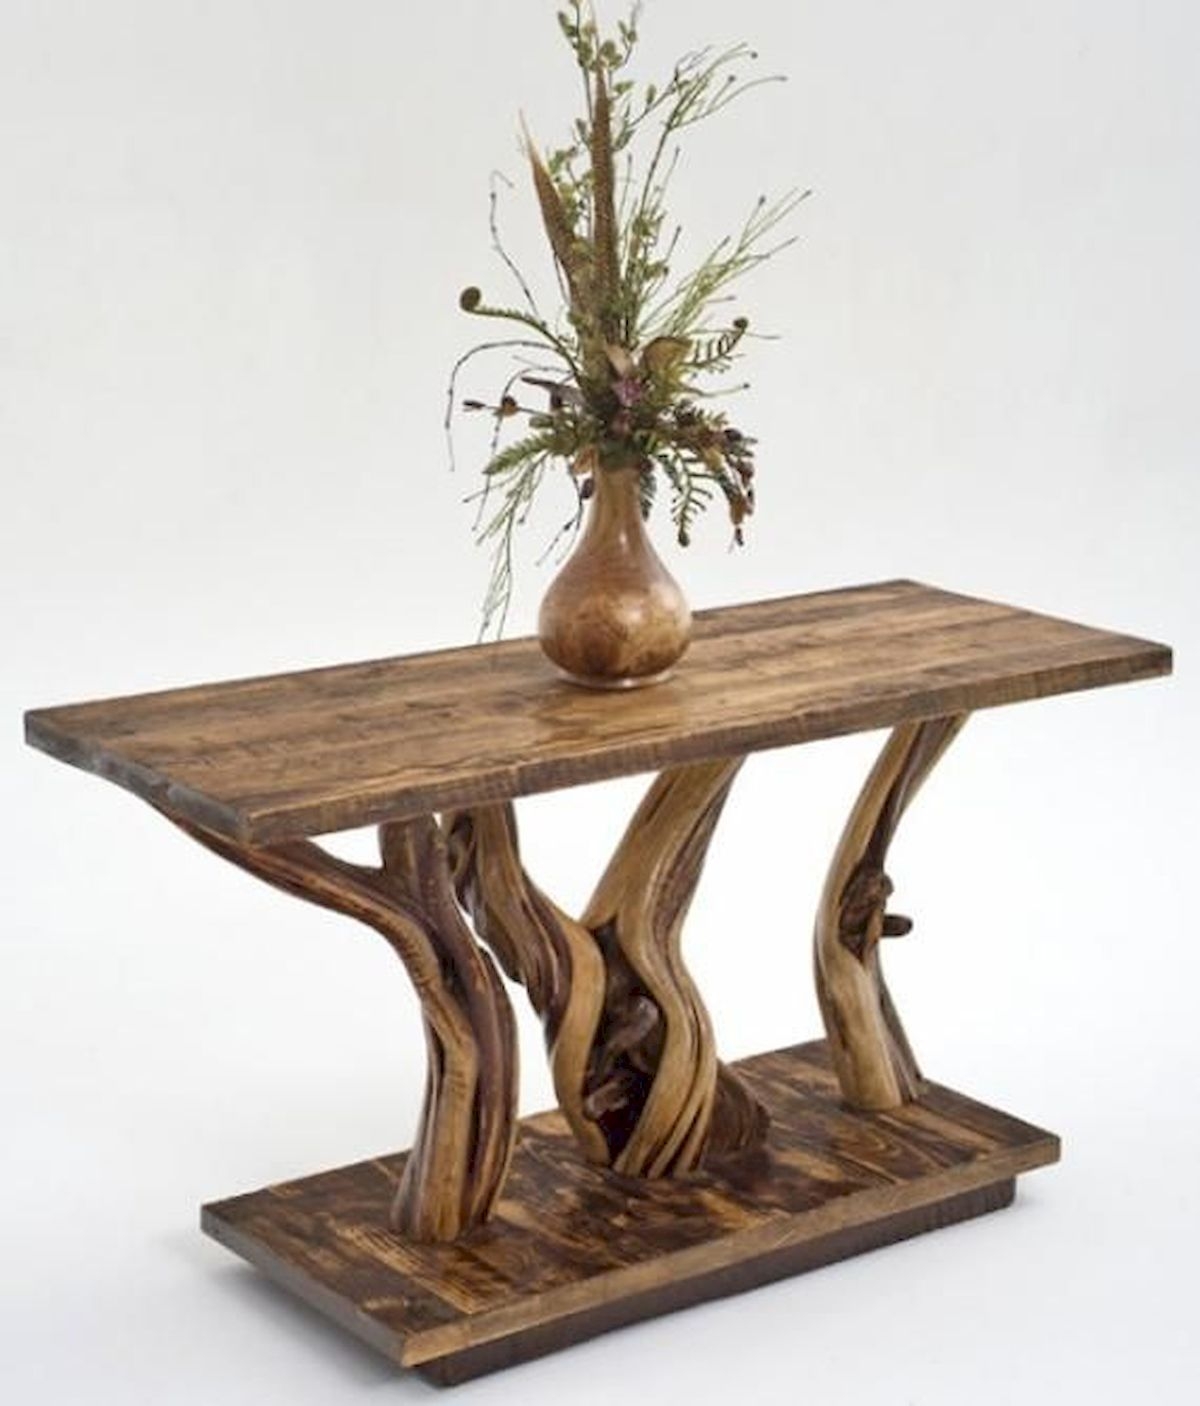 Driftwood console eclectic side tables and accent tables by